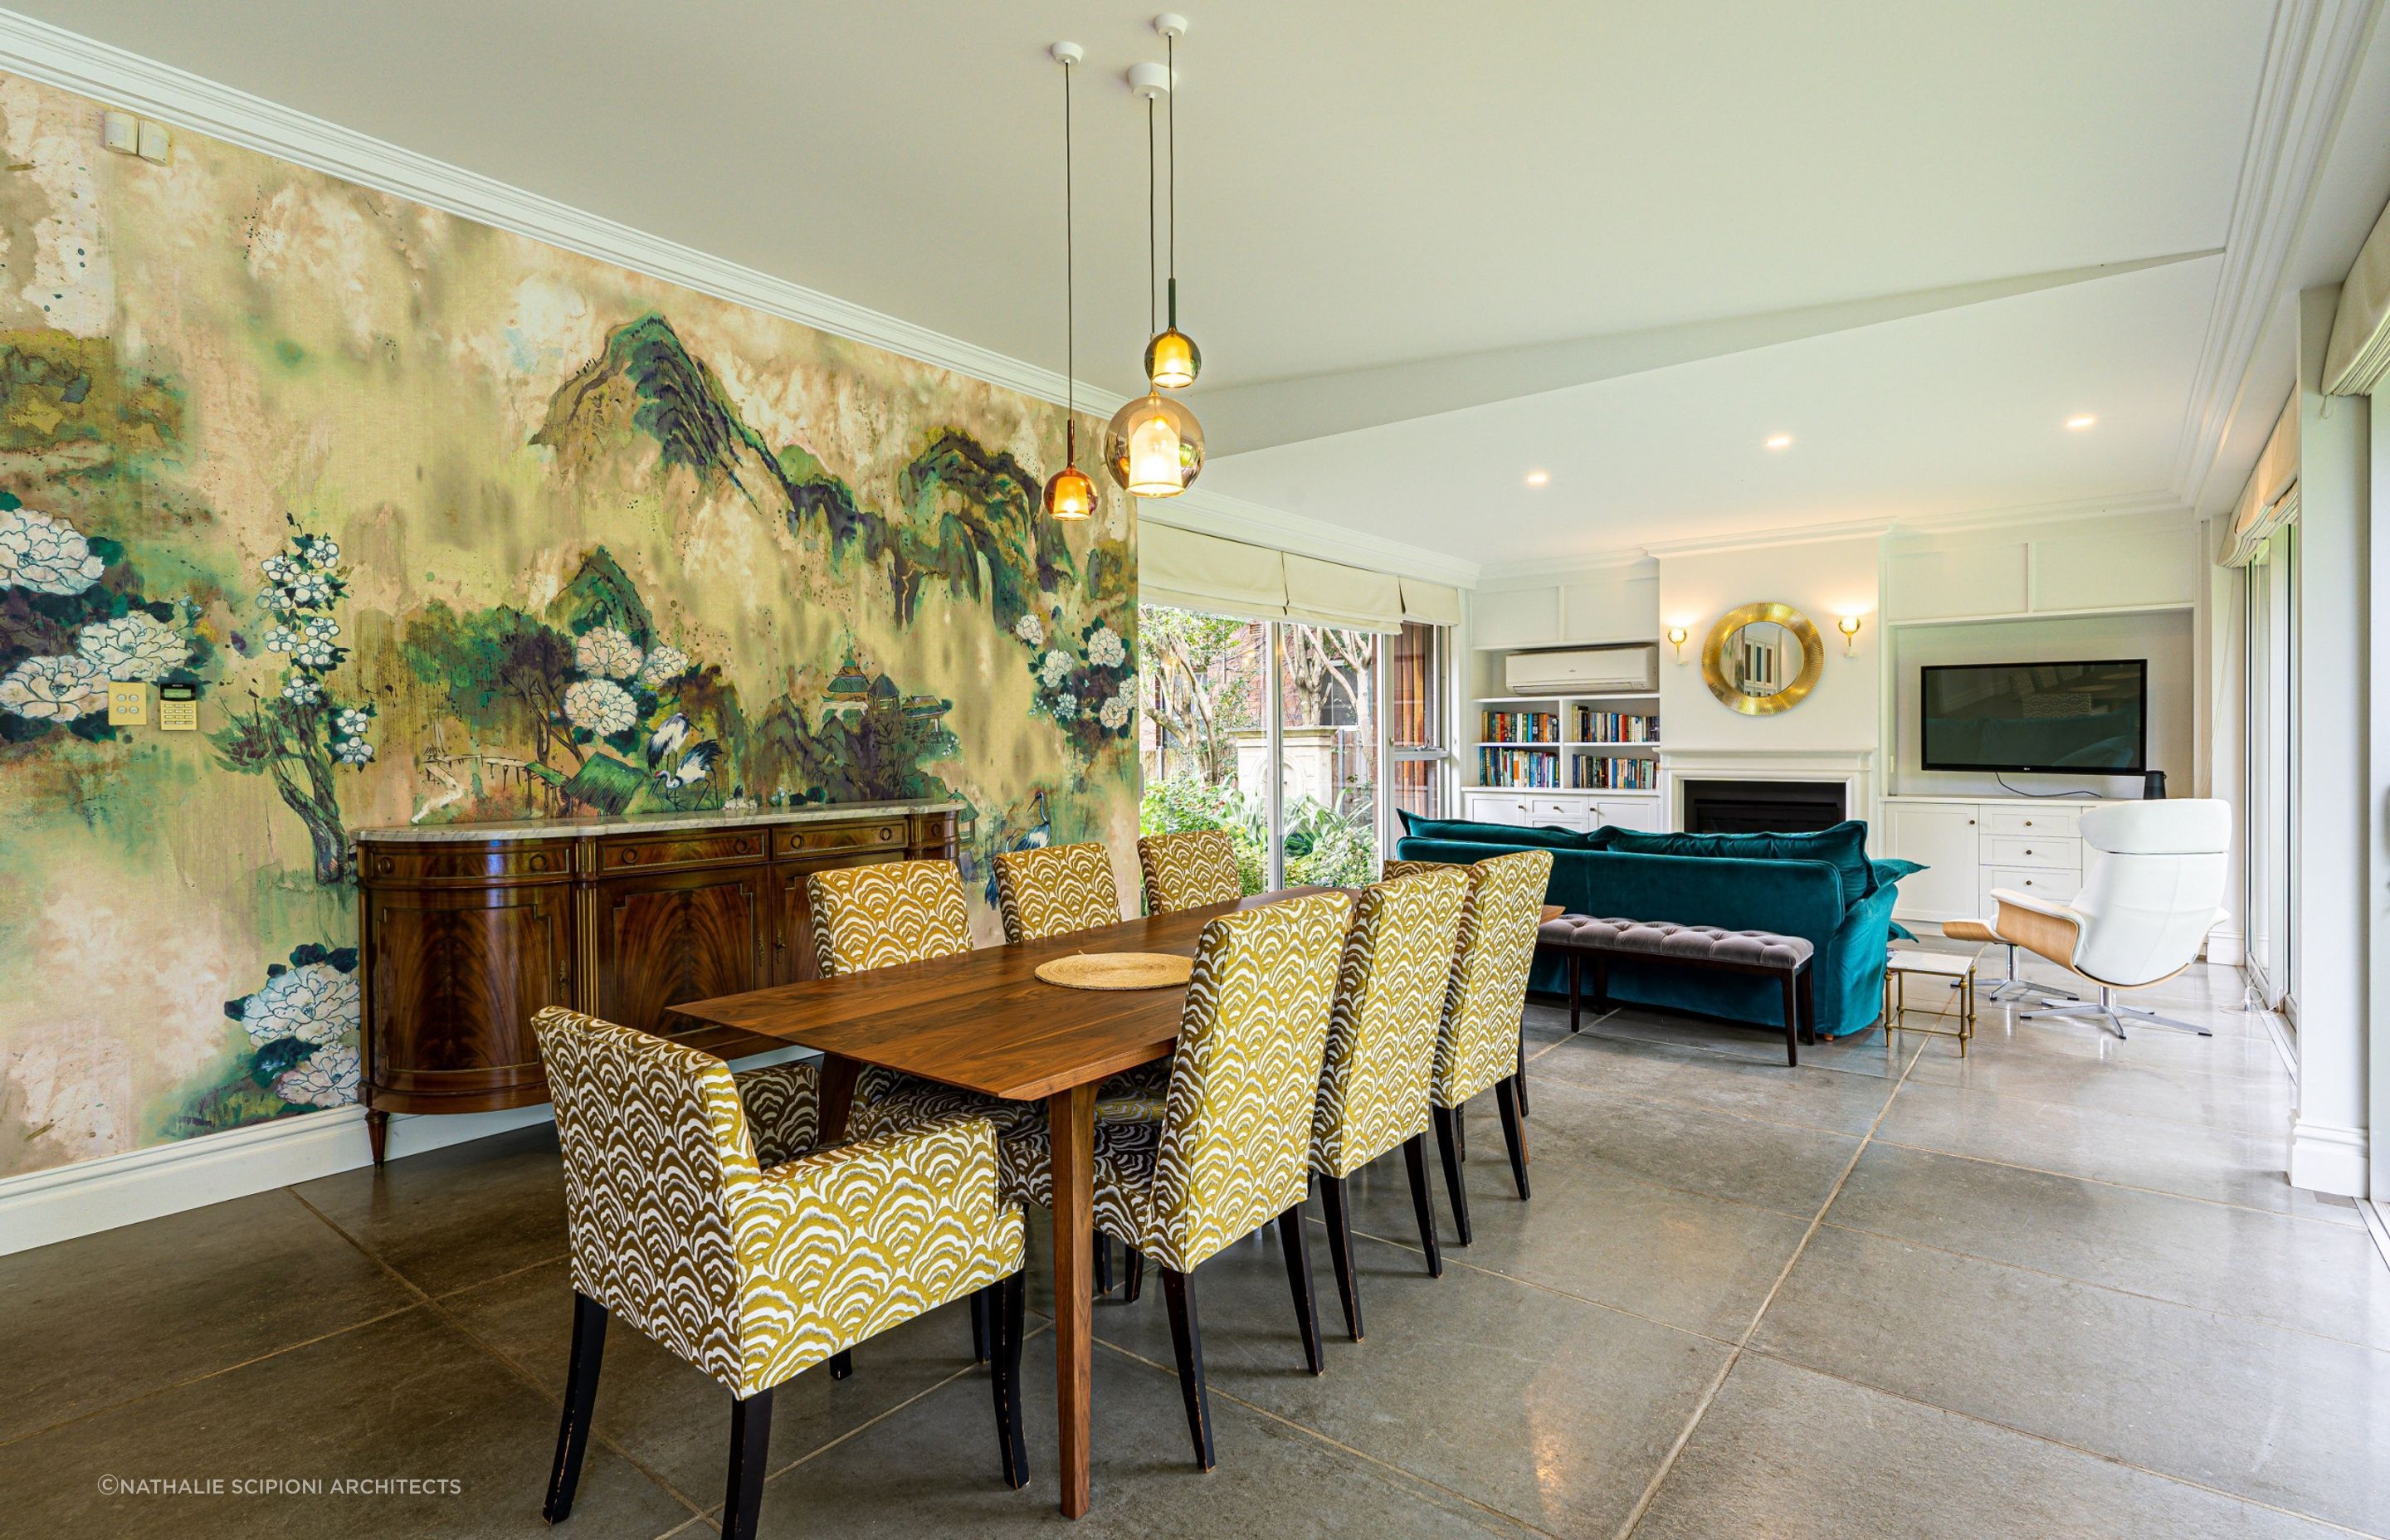 A medium to large sized dining room can easily fit a table that accommodates plenty of diners.